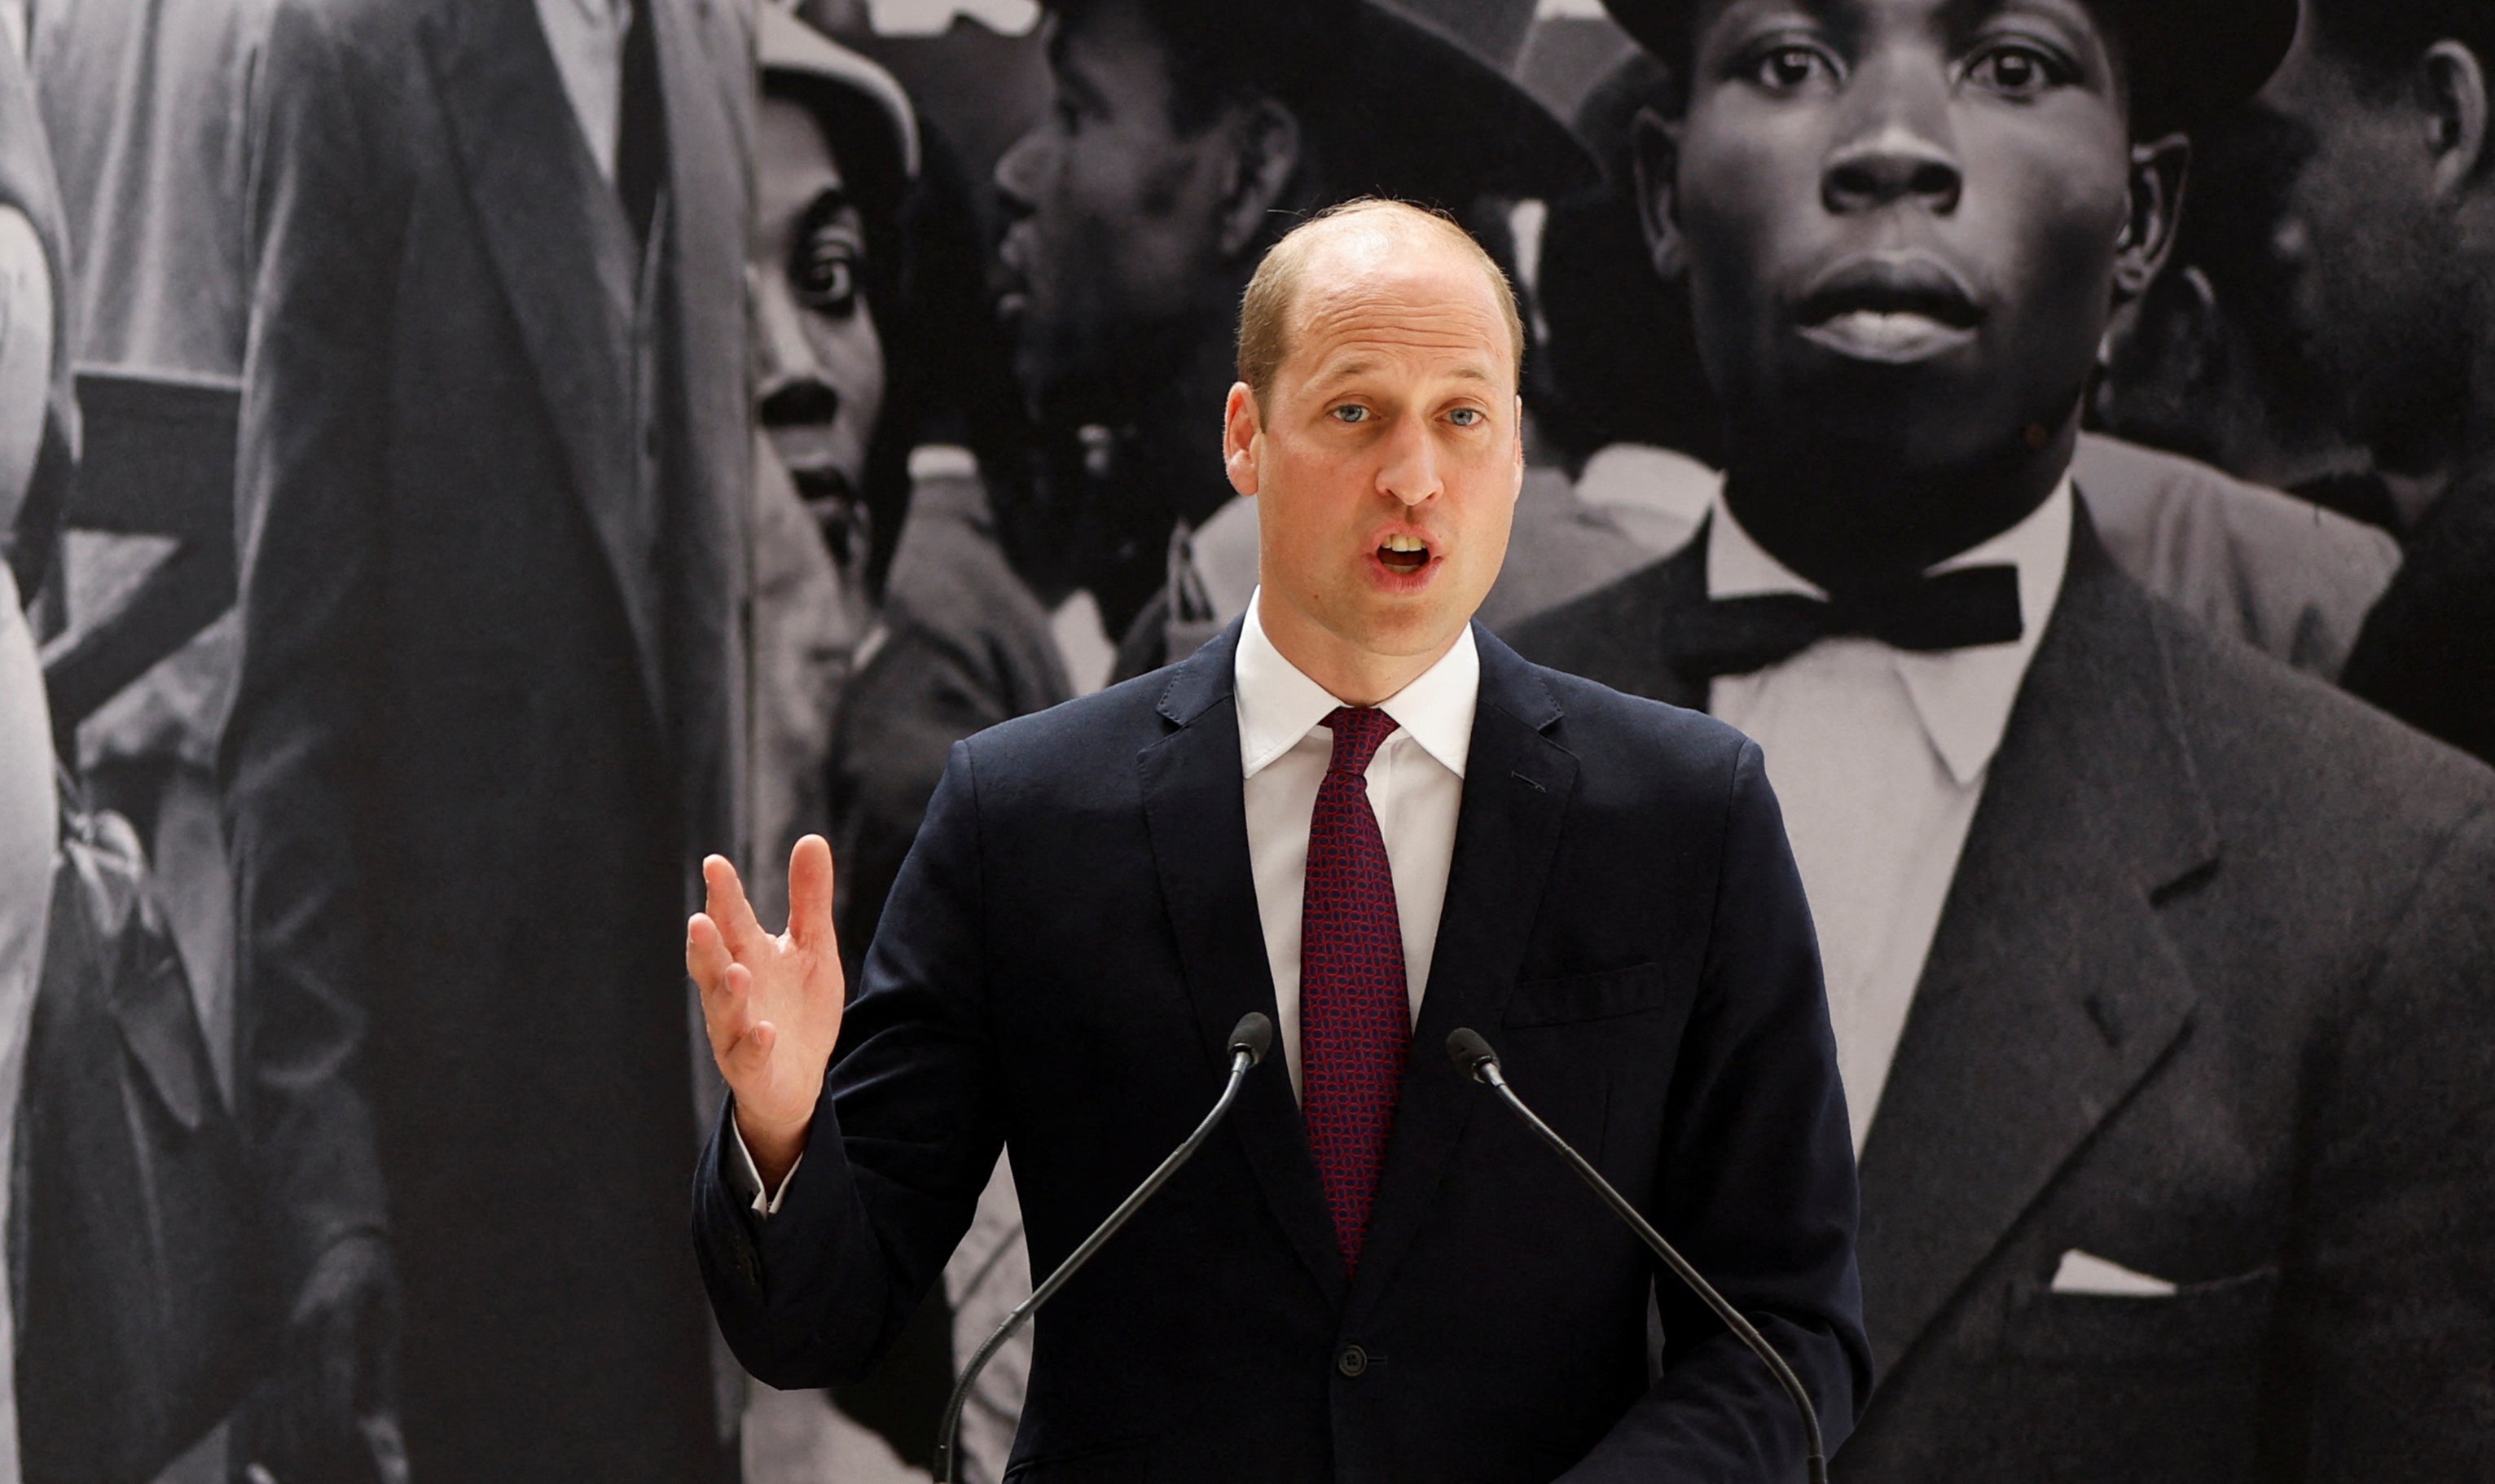 Prince William, Duke of Cambridge, speaks during the unveiling of the National Windrush Monument at Waterloo Station in London on June 22, 2022.